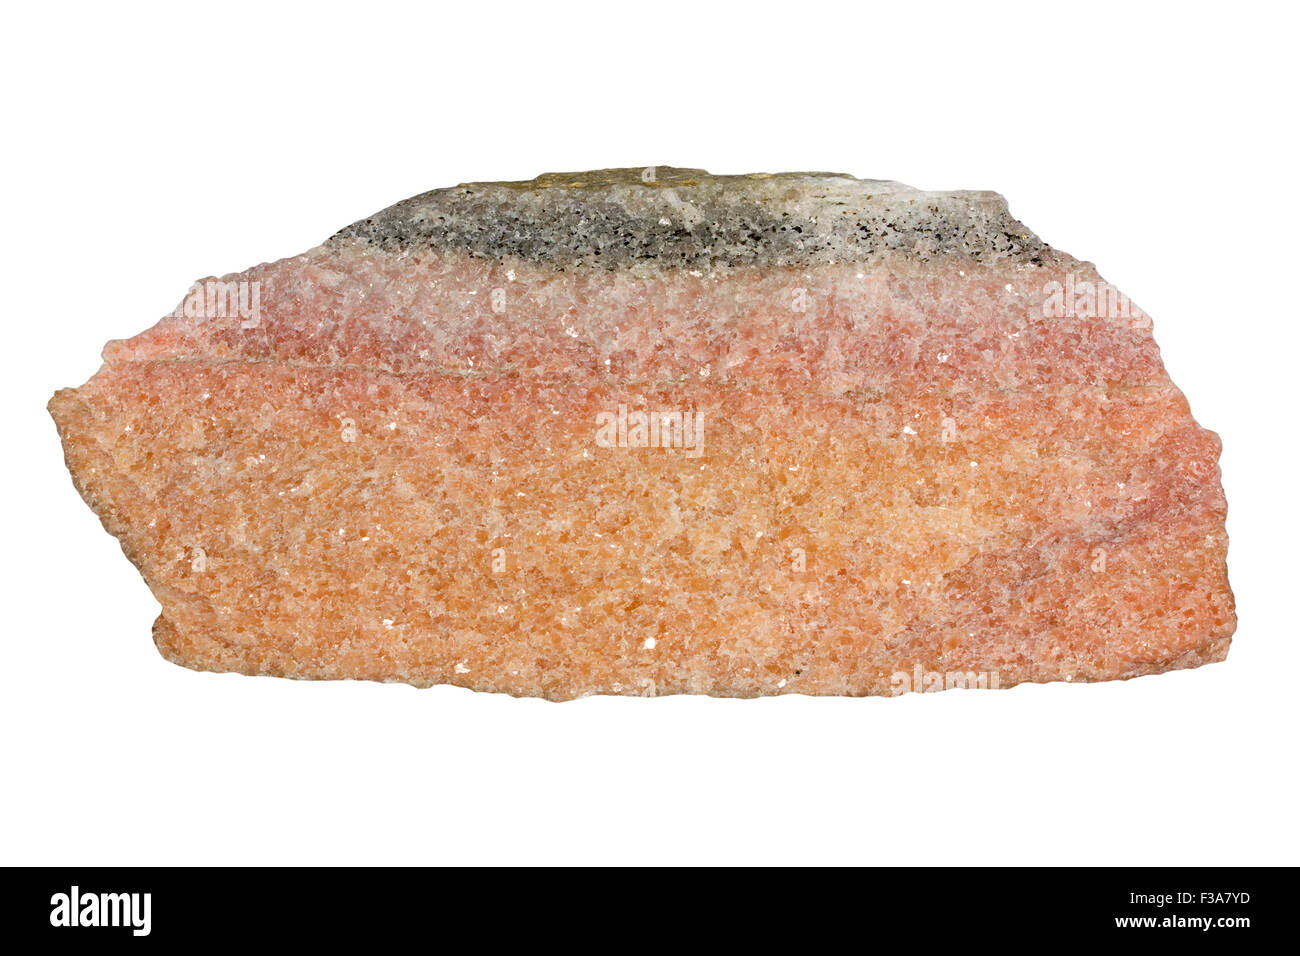 Marble rock sample from Fauske Stock Photo